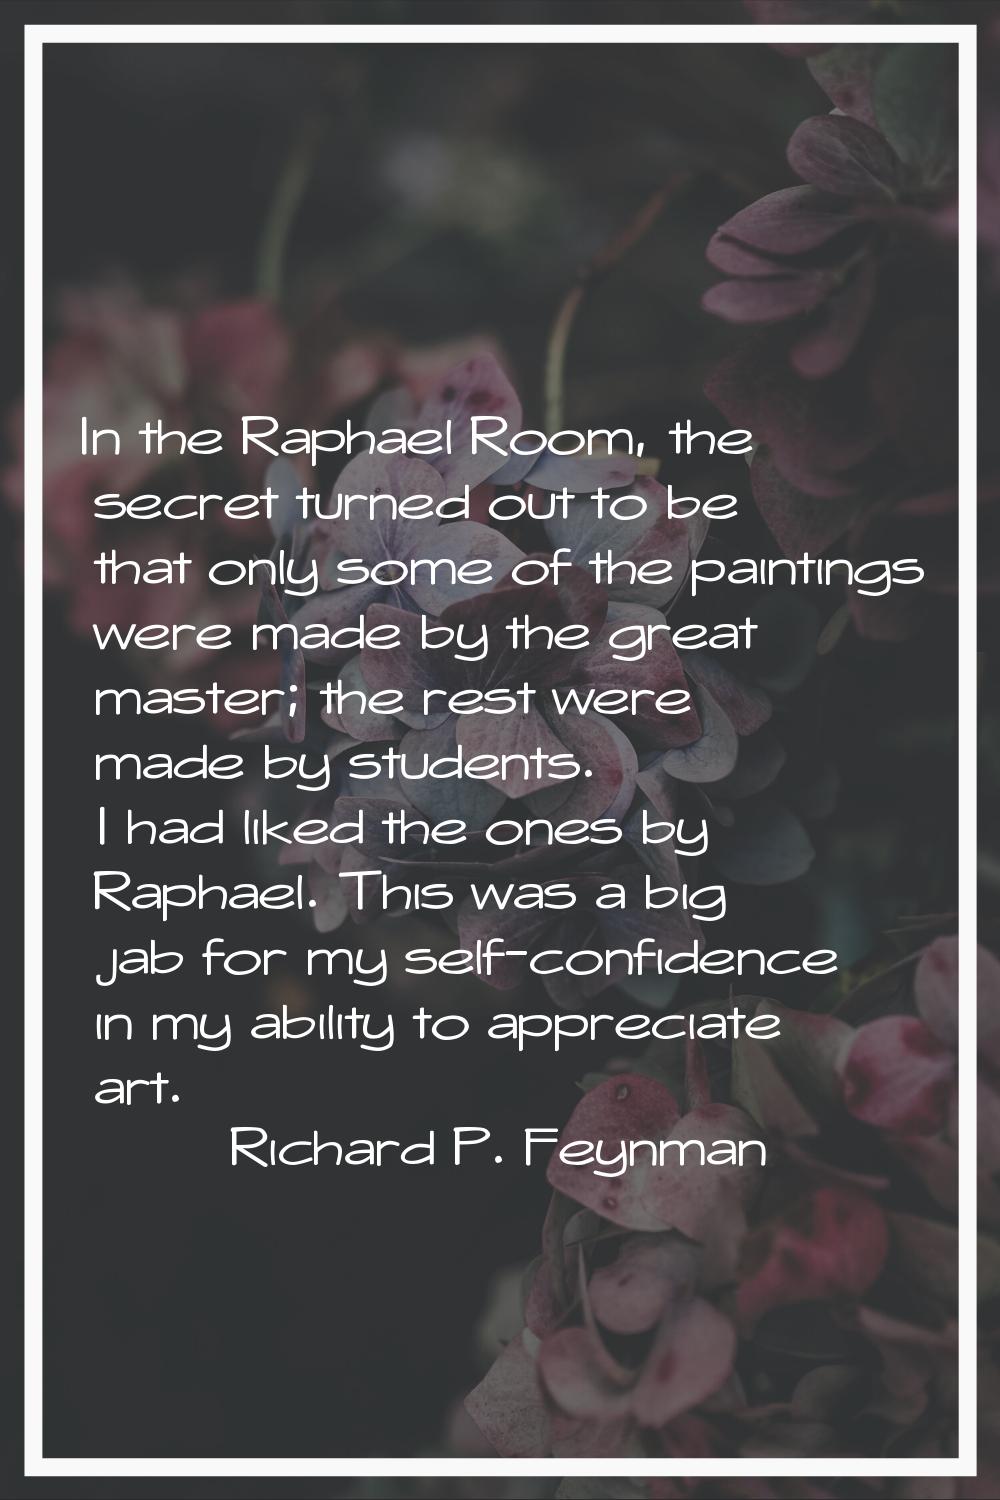 In the Raphael Room, the secret turned out to be that only some of the paintings were made by the g